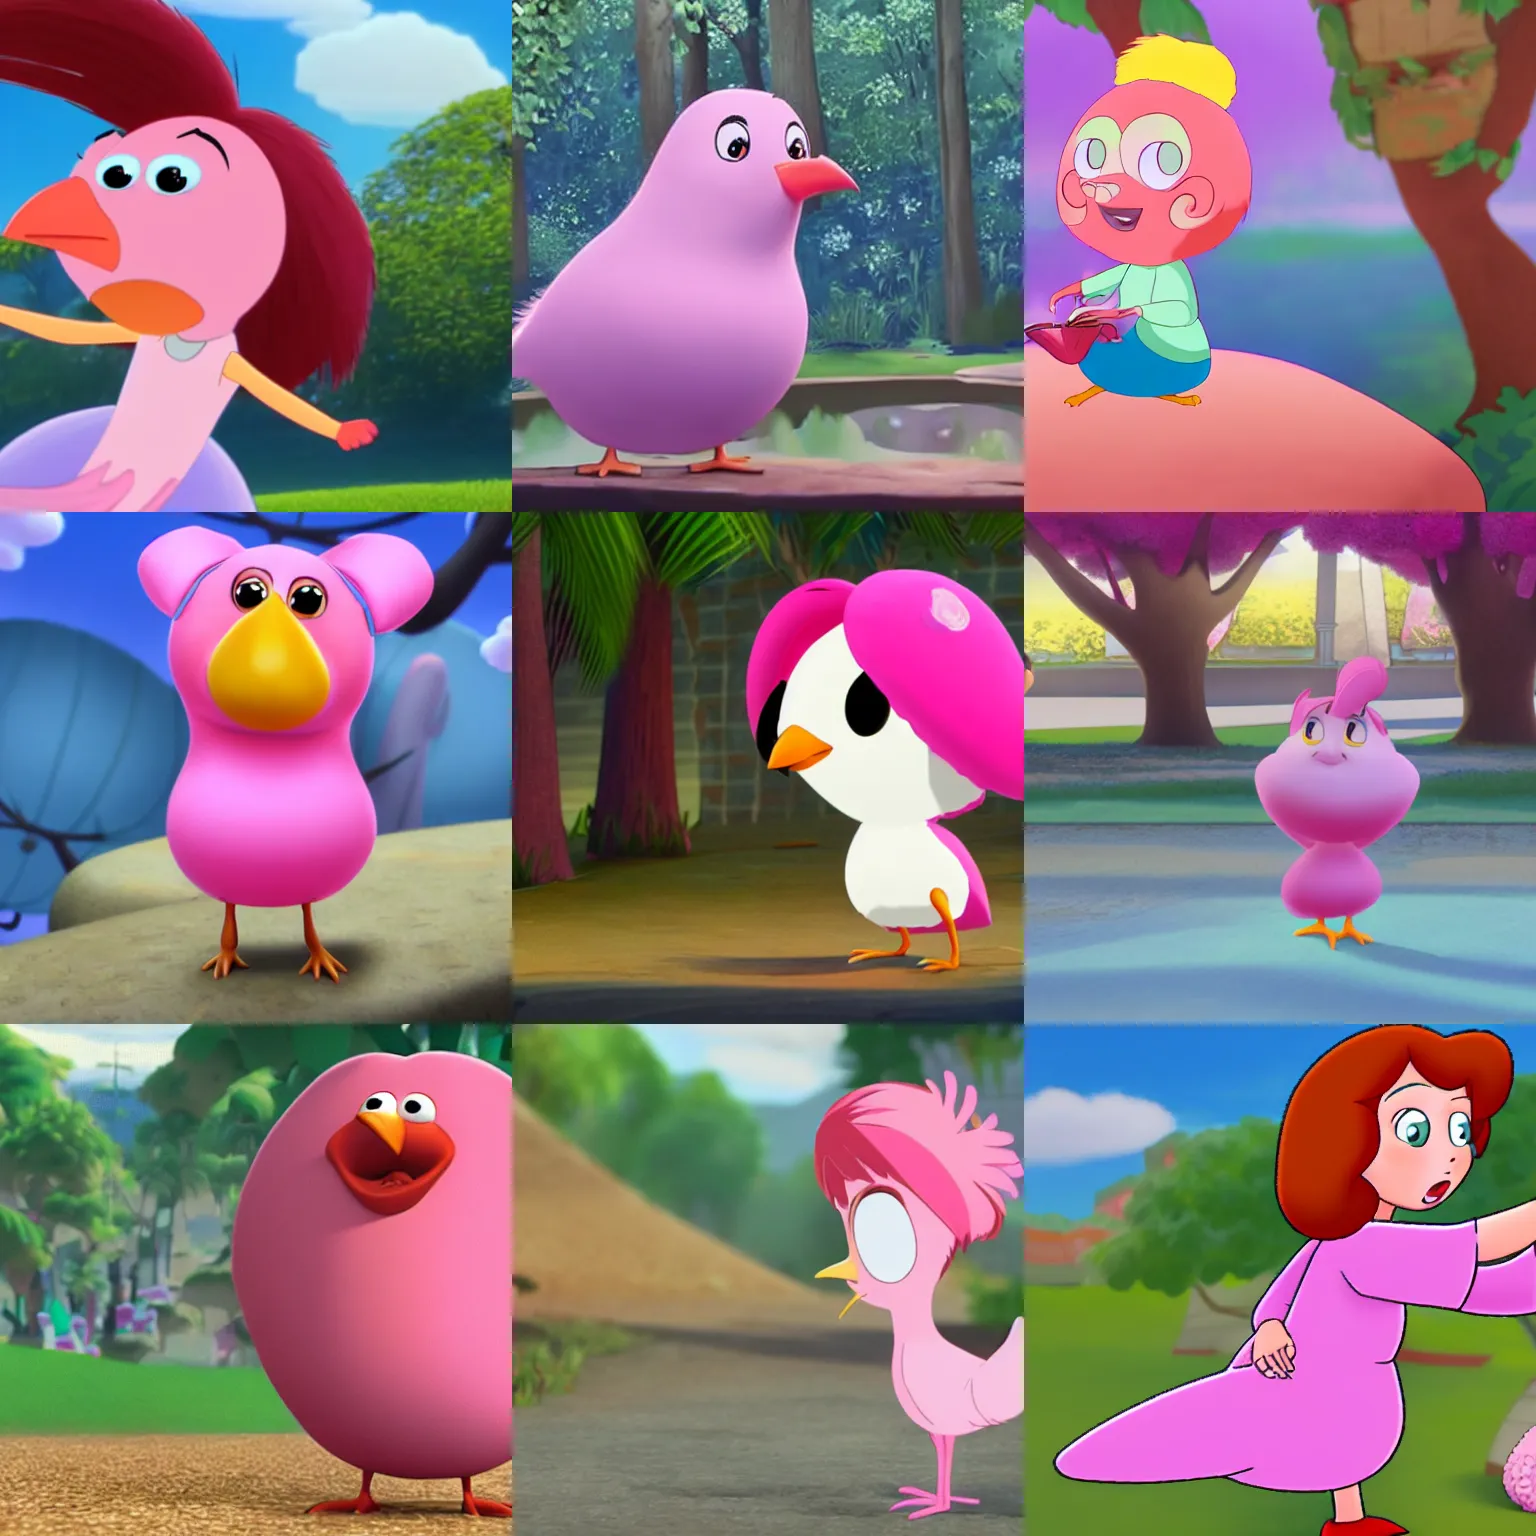 Prompt: screenshot of animated movie with a round pink bird character with short bangs